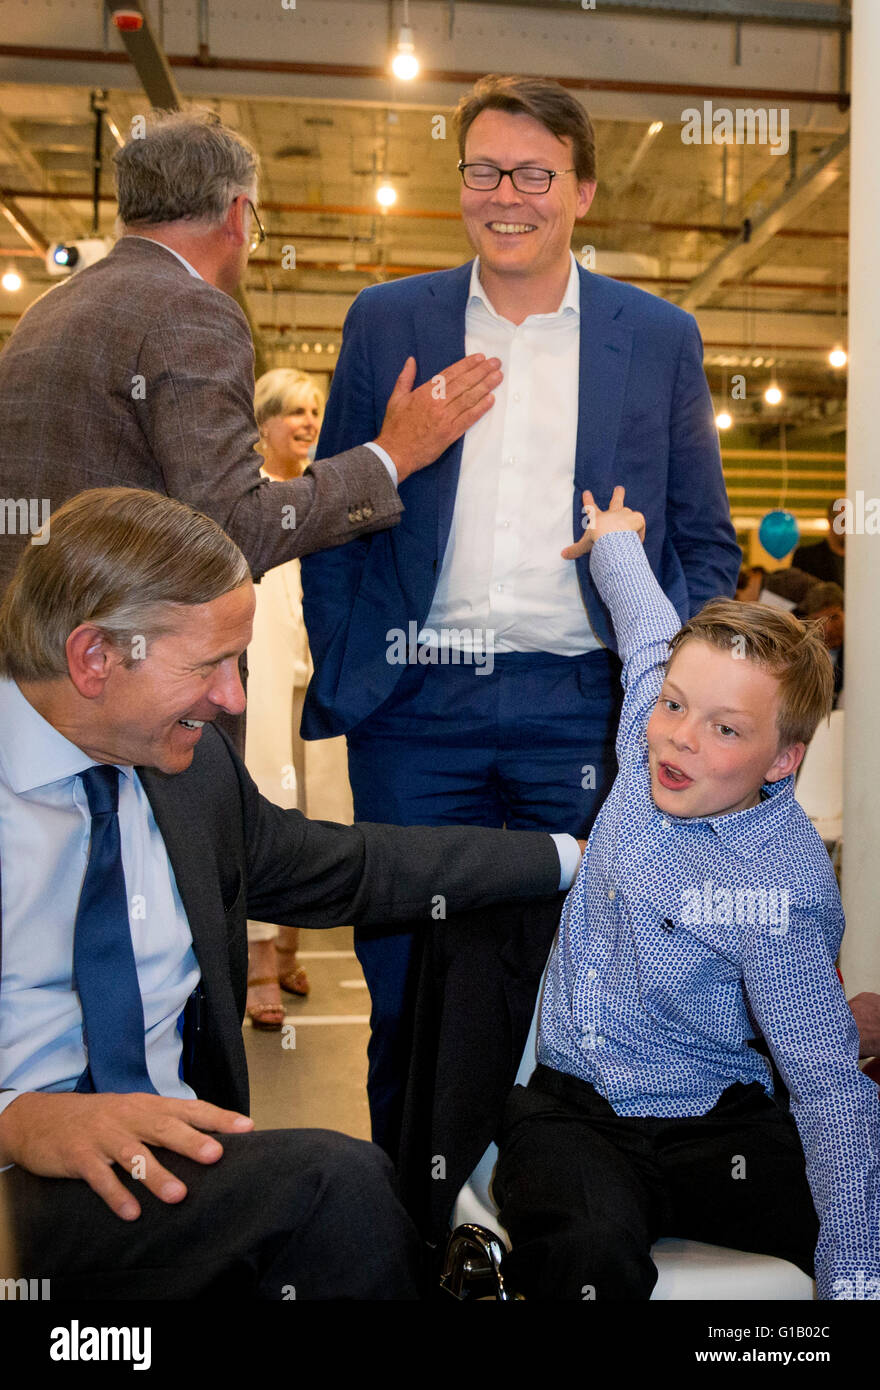 Princess Laurentien and Prince Constantijn of The Netherlands with ...